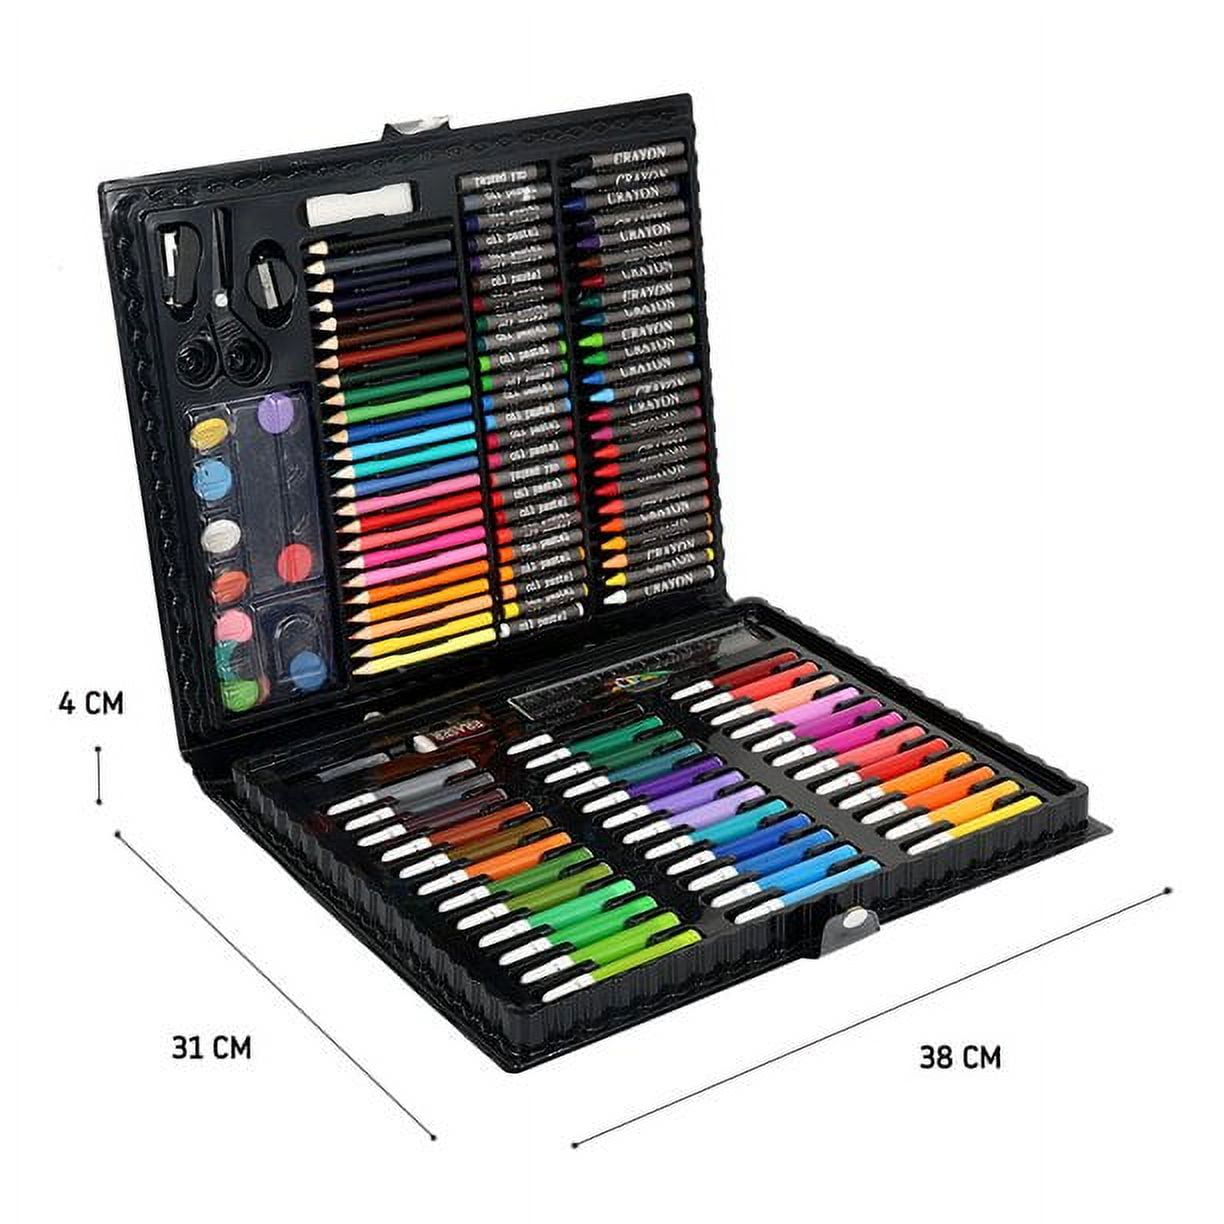 LUCYCAZ Drawing Kit - Art Supplies for Kids 9-12 Travel Drawing Set  Includes Drawing Pad Origami Paper Sketch and Colored Pencils Eraser and  Sharpener. Sketch Kit for Kids Teens and Adults